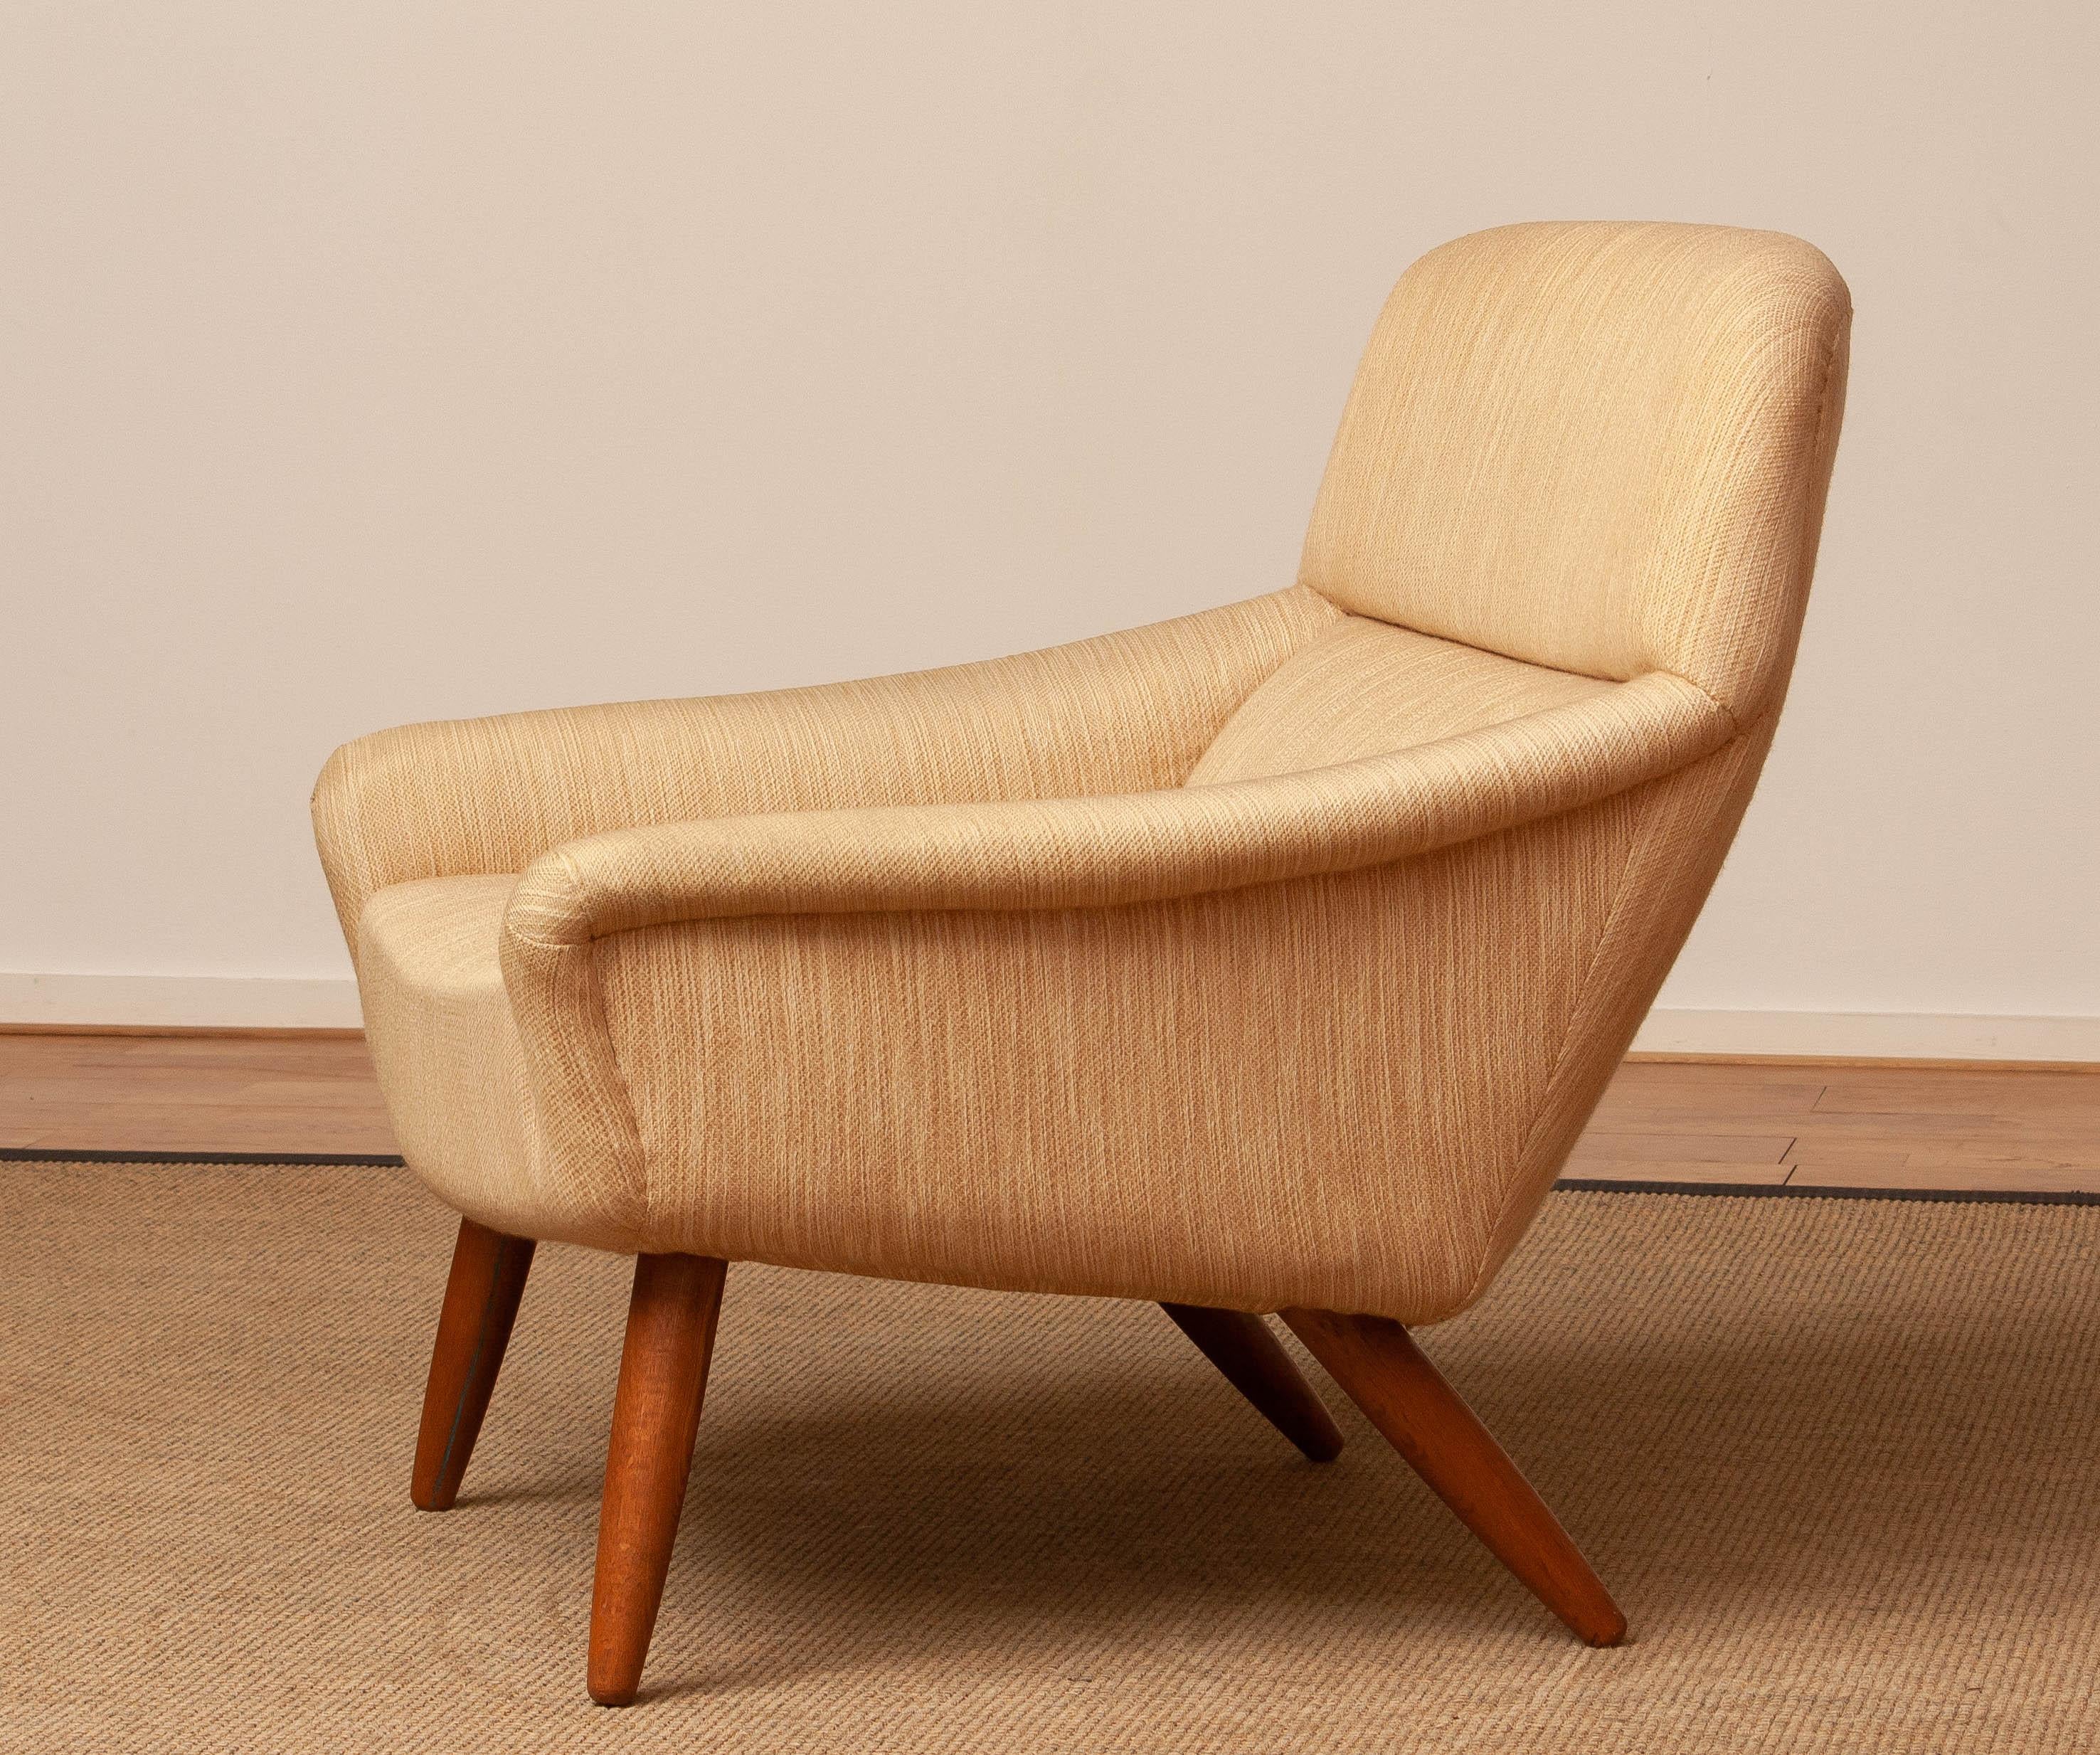 1960s Natural Wool and Oak Lounge Chair by Leif Hansen for Kronen in Denmark For Sale 3